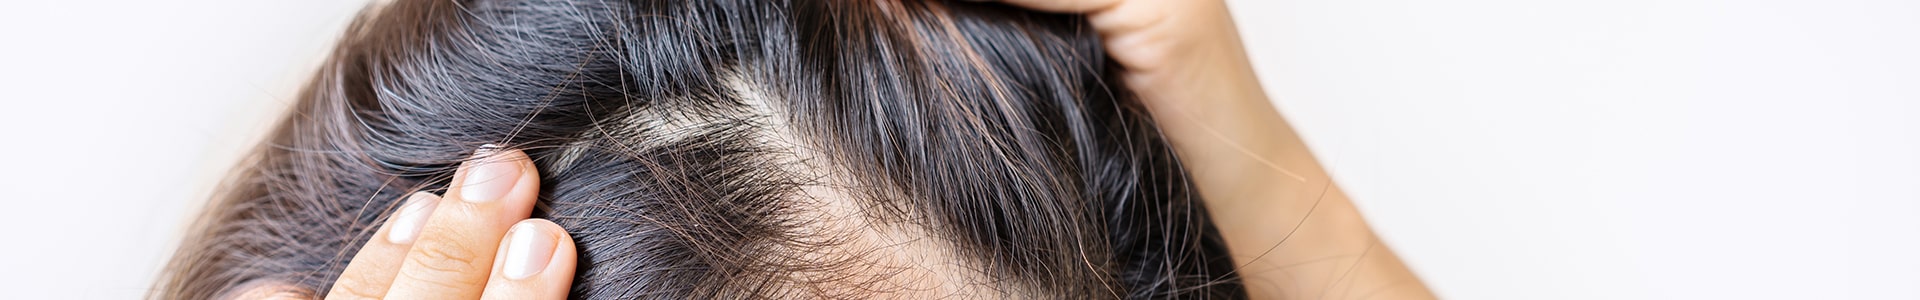 hair loss treatments in milwaukee, wi